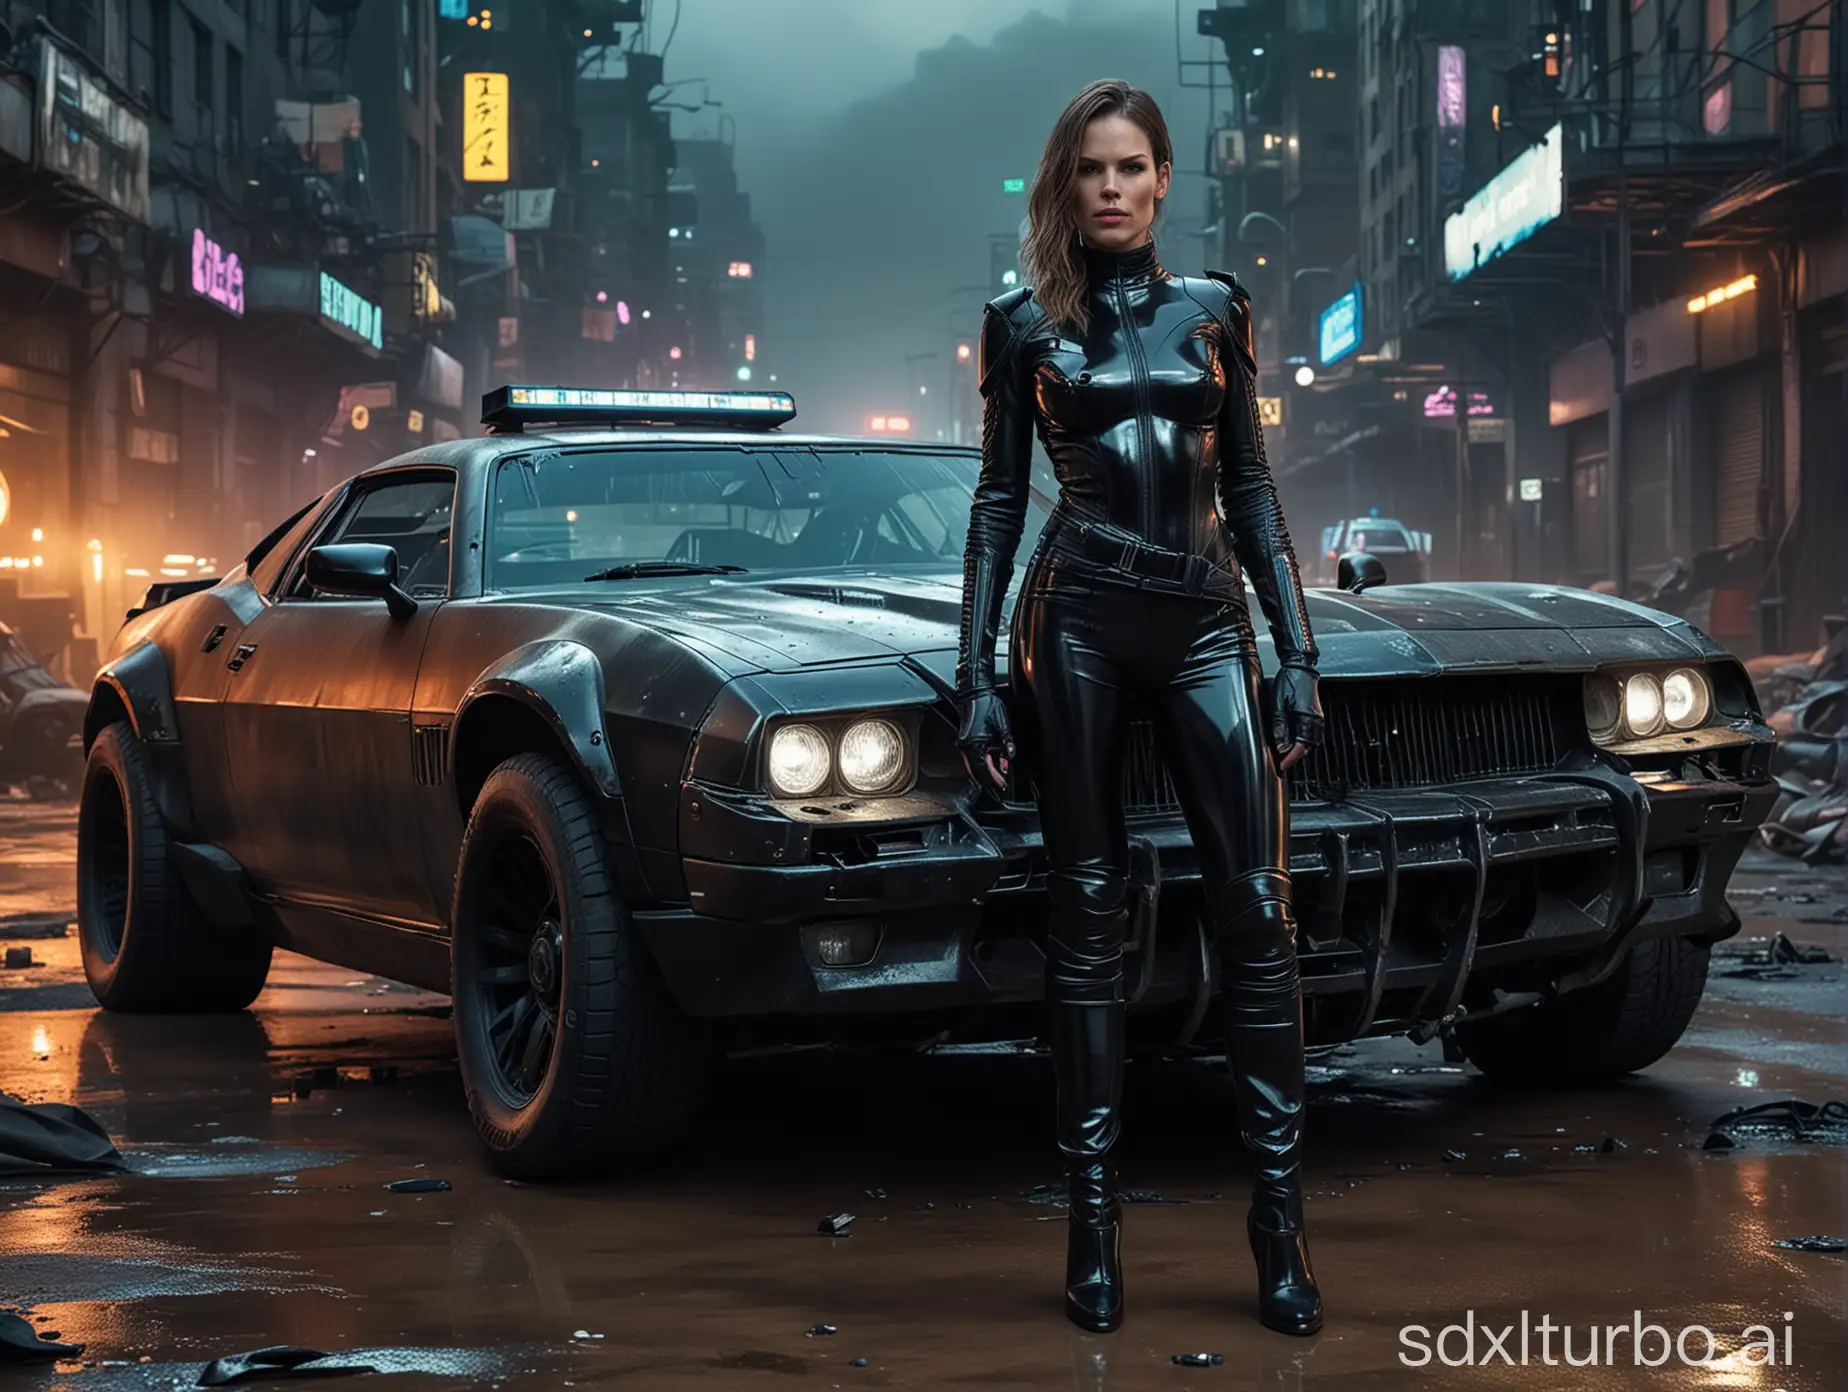 realistic hd photo , cyberpunk police Hilary Swank standing , wearing black low-cut shinny pvc catsuit , wearing long shiny pvc gloves , wearing shinny pvc thigh high boots , in destroyed cyberpunk city with mad max car , inlighted by neons